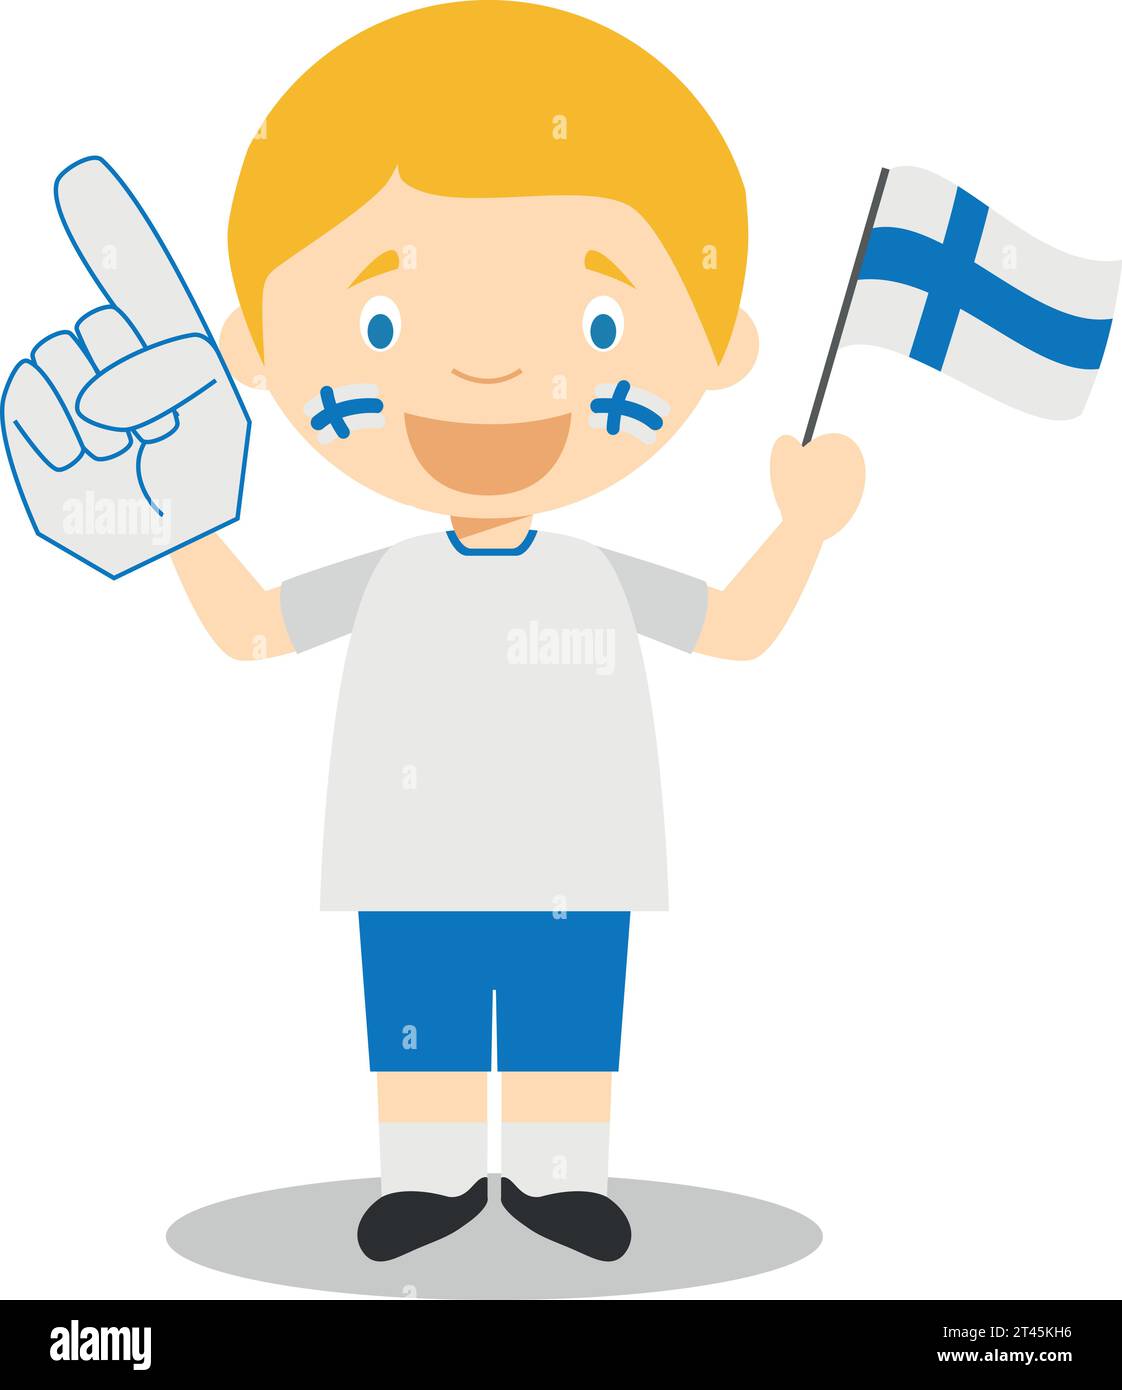 National sport team fan from Finland with flag and glove Vector Illustration Stock Vector